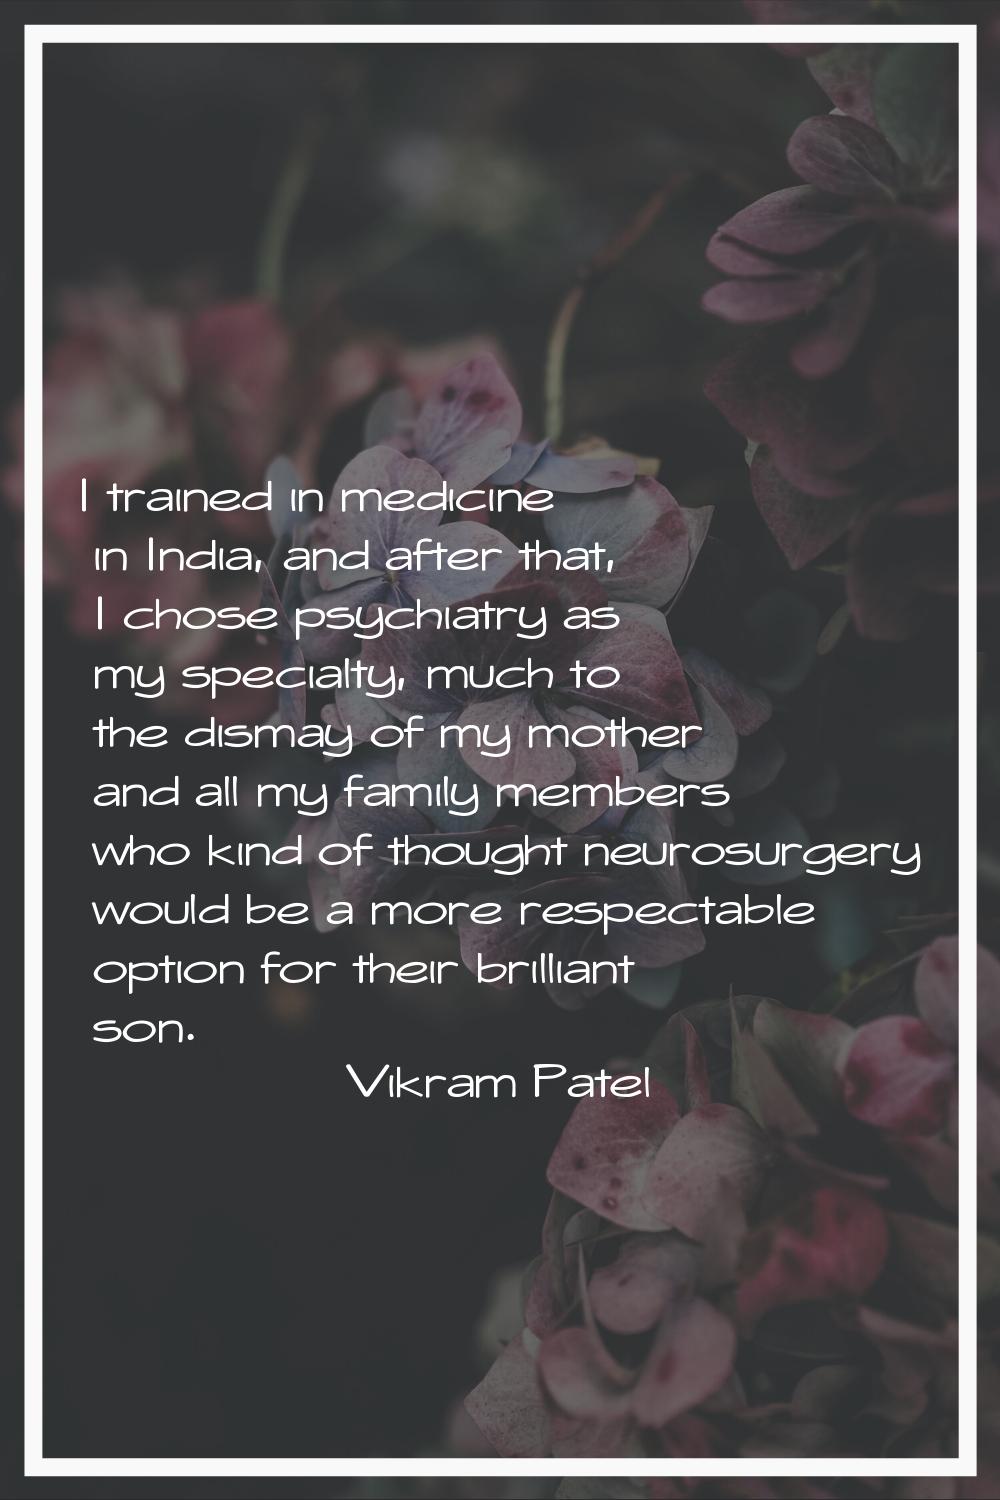 I trained in medicine in India, and after that, I chose psychiatry as my specialty, much to the dis